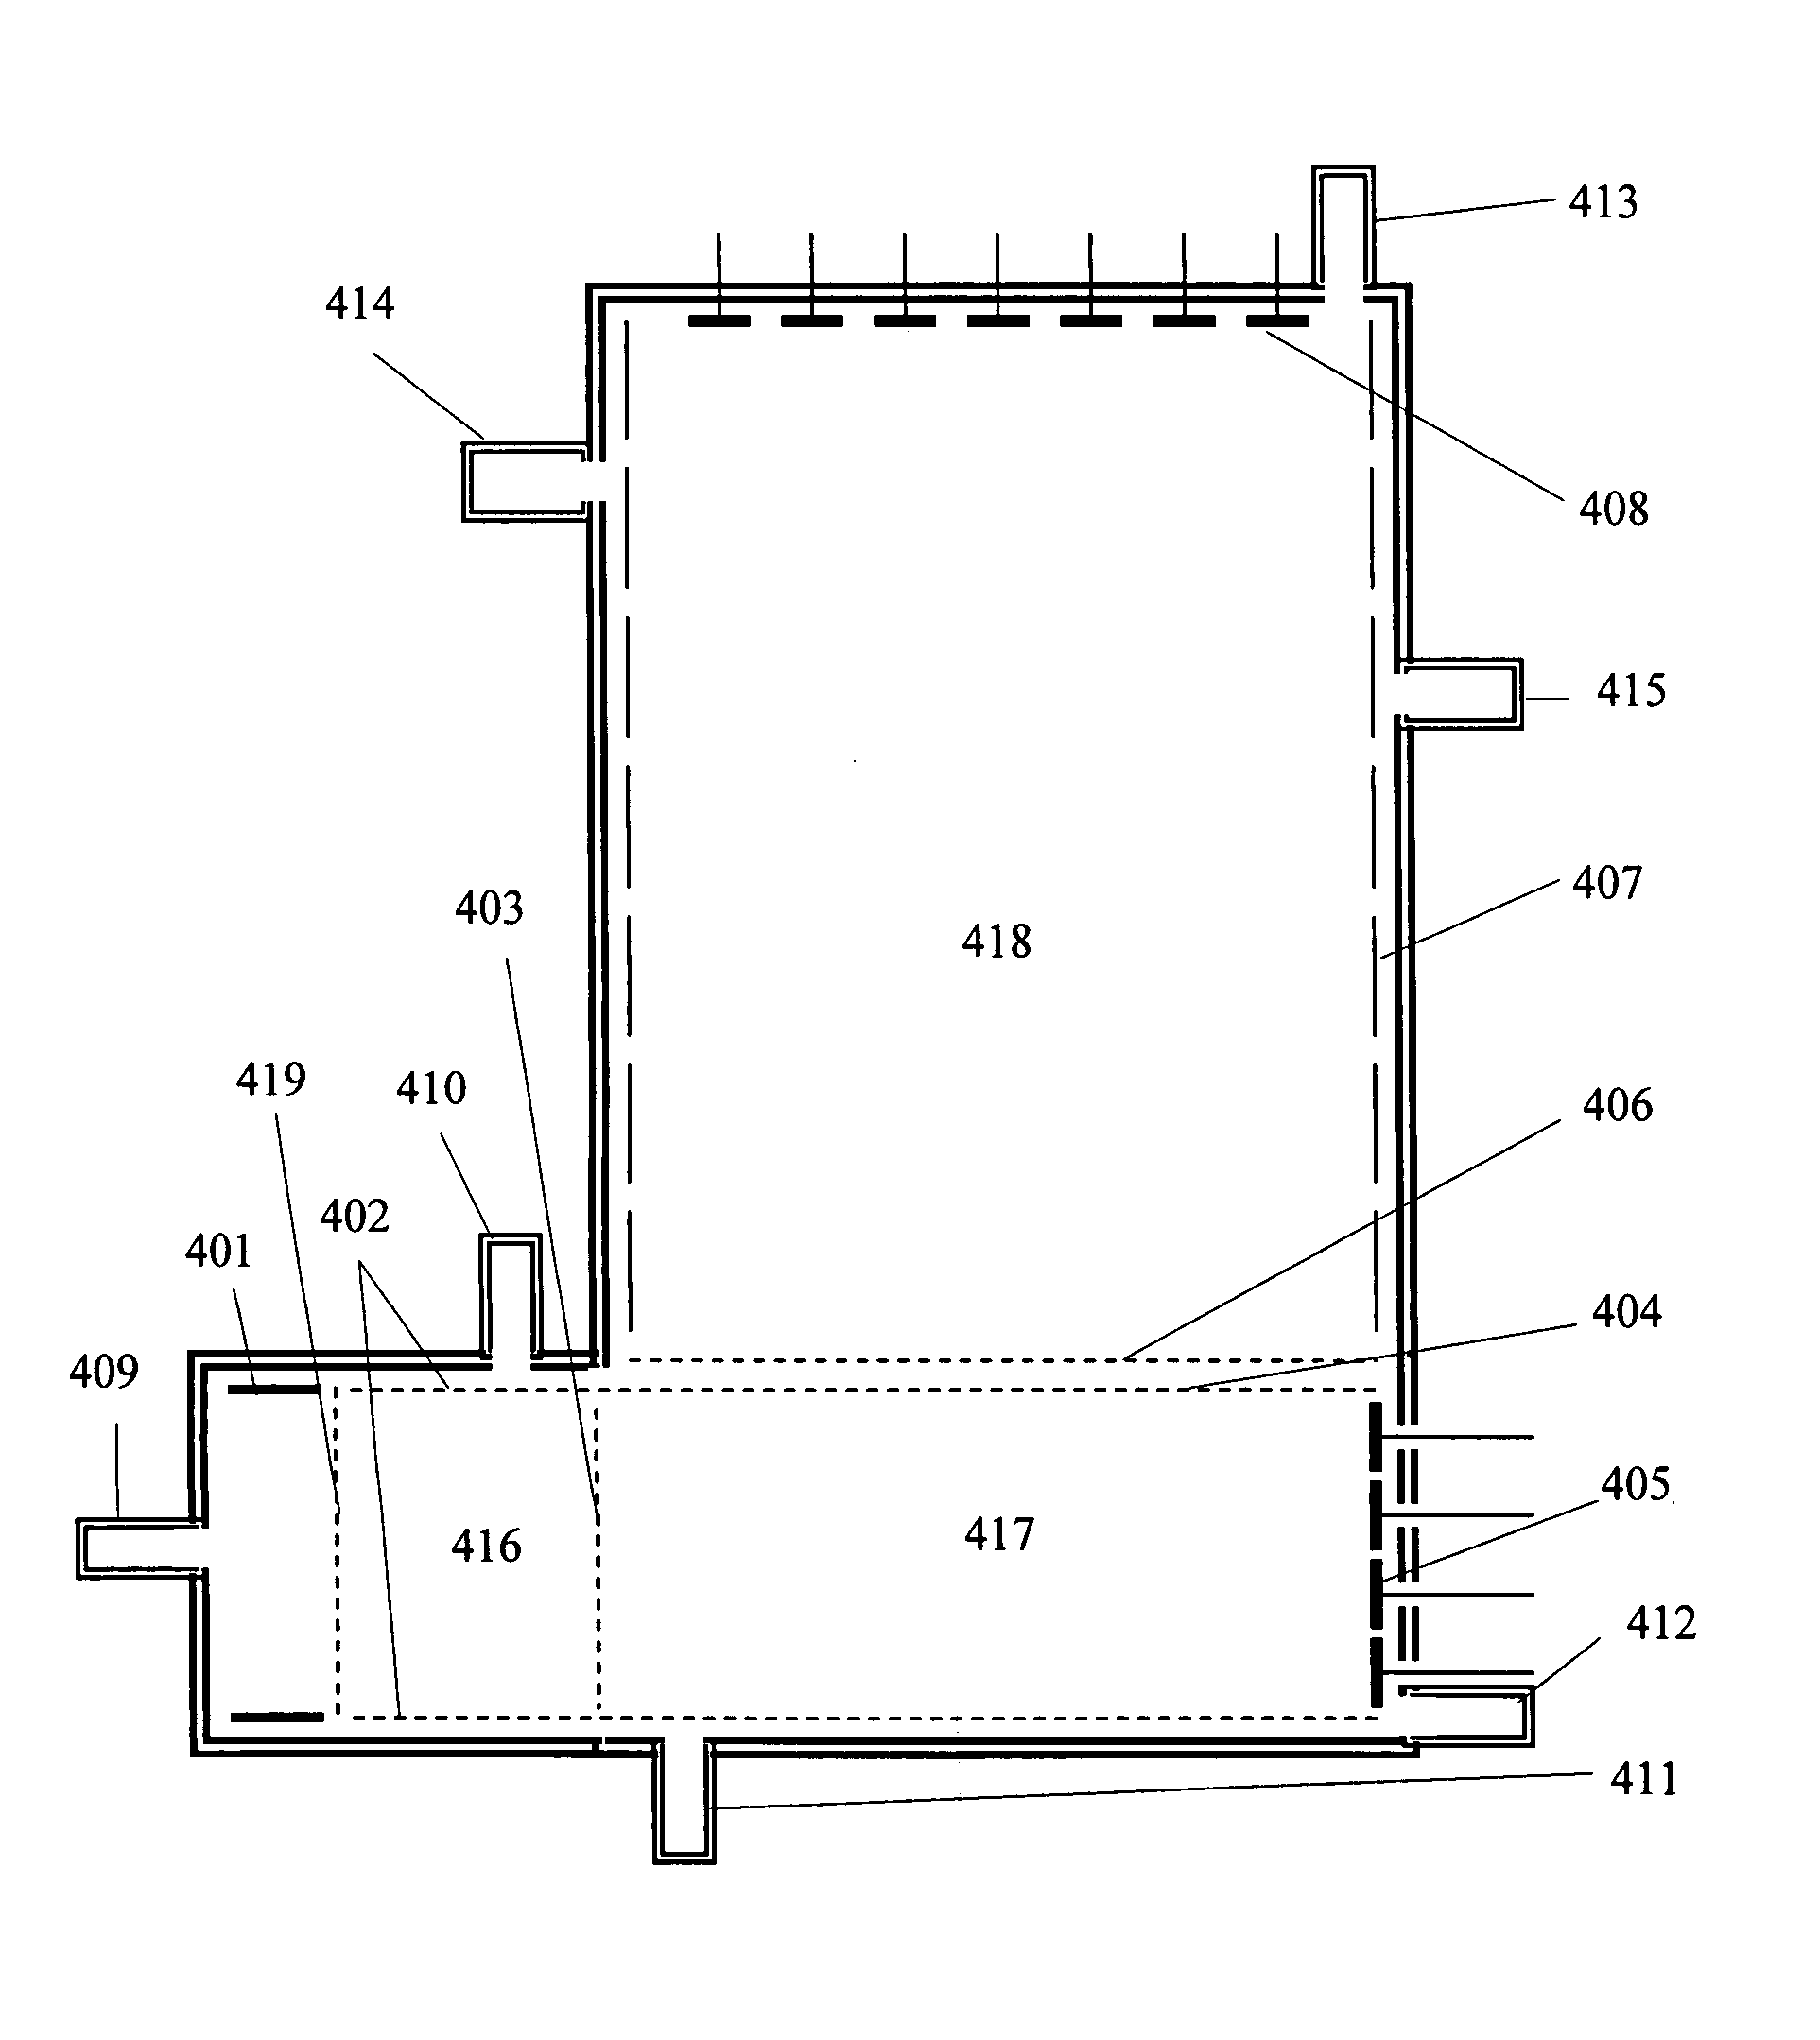 Multidimensional Ion Mobility Spectrometry Apparatus and Methods